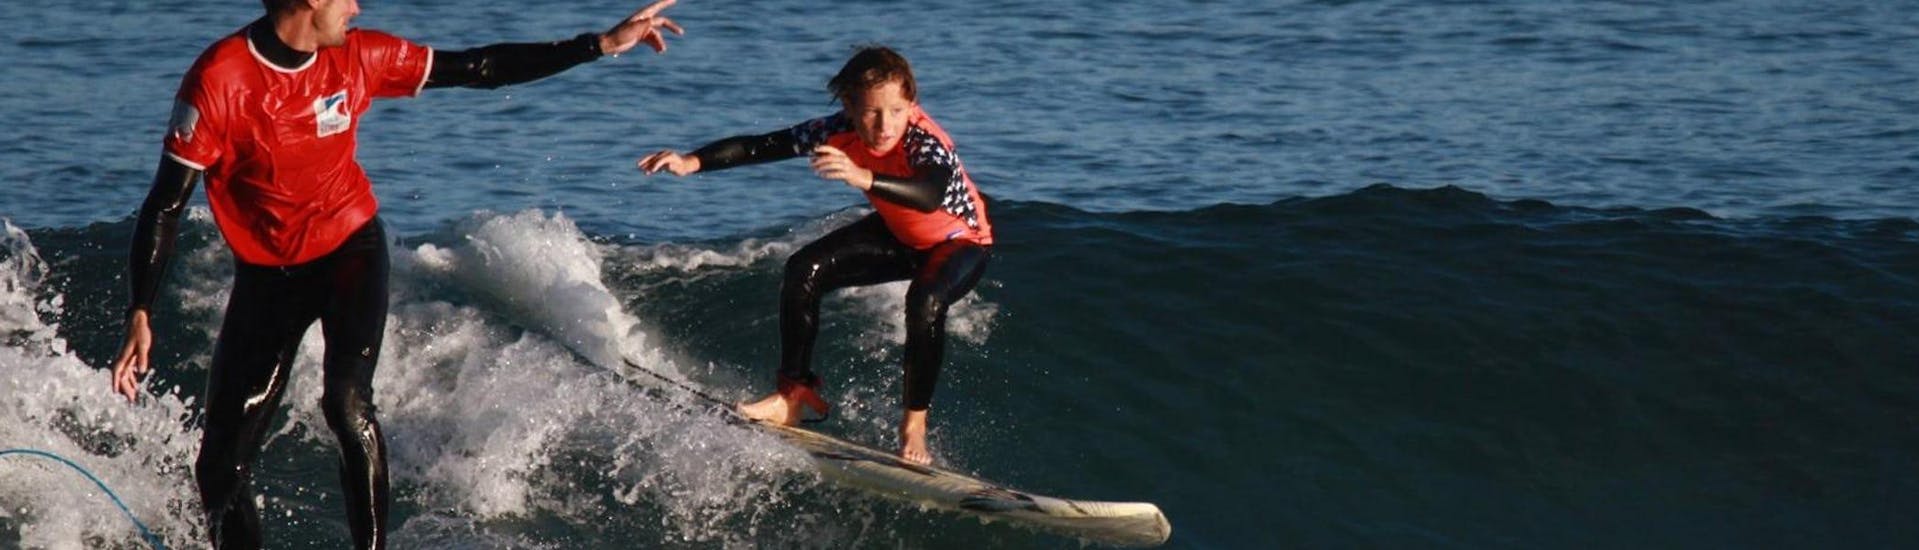 A kid is surfing during Surfing Lessons - Hendaye Beach - Advanced activity operated by Gold Coast Hendaye.